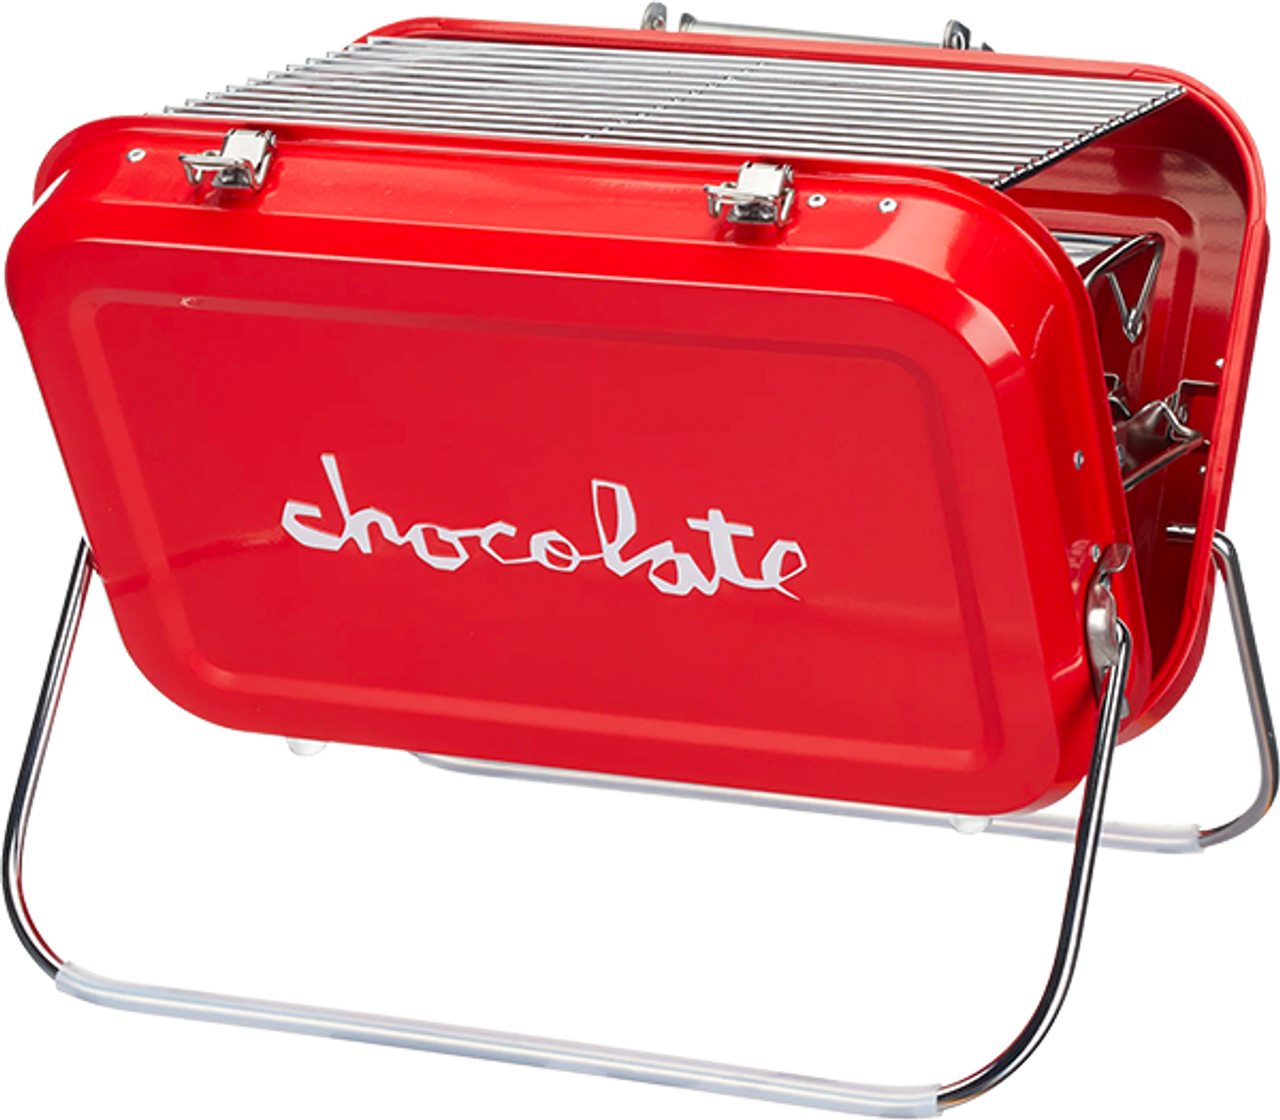 CHOCOLATE CHUNK FOLDING CHARCOAL GRILL RED